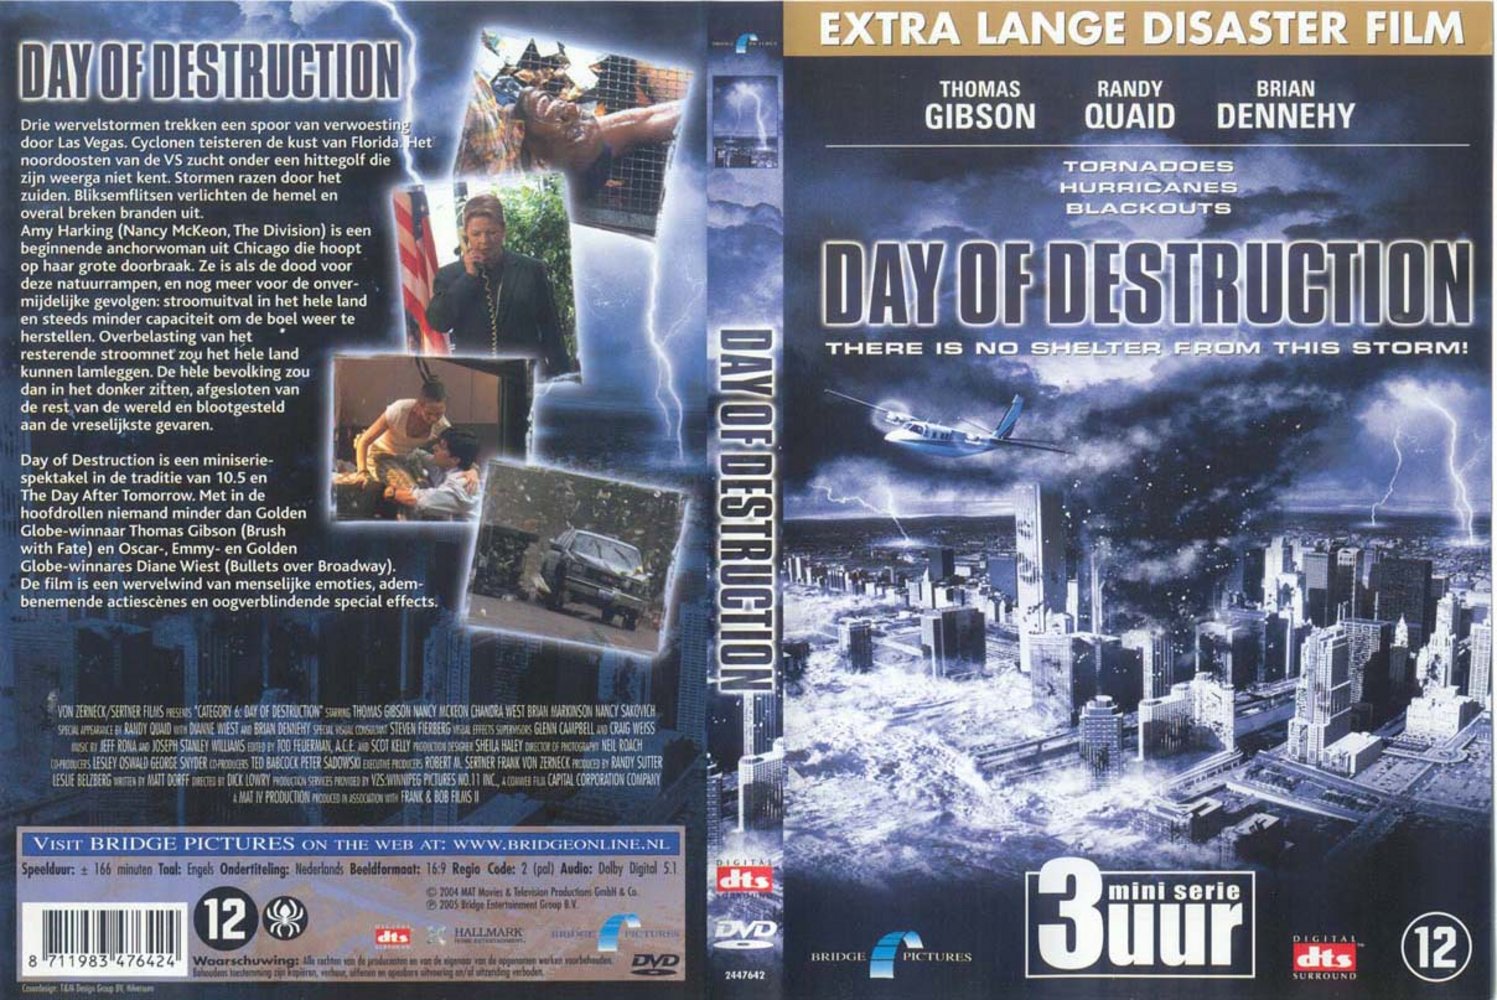 Jaquette DVD Day of destruction Zone 1